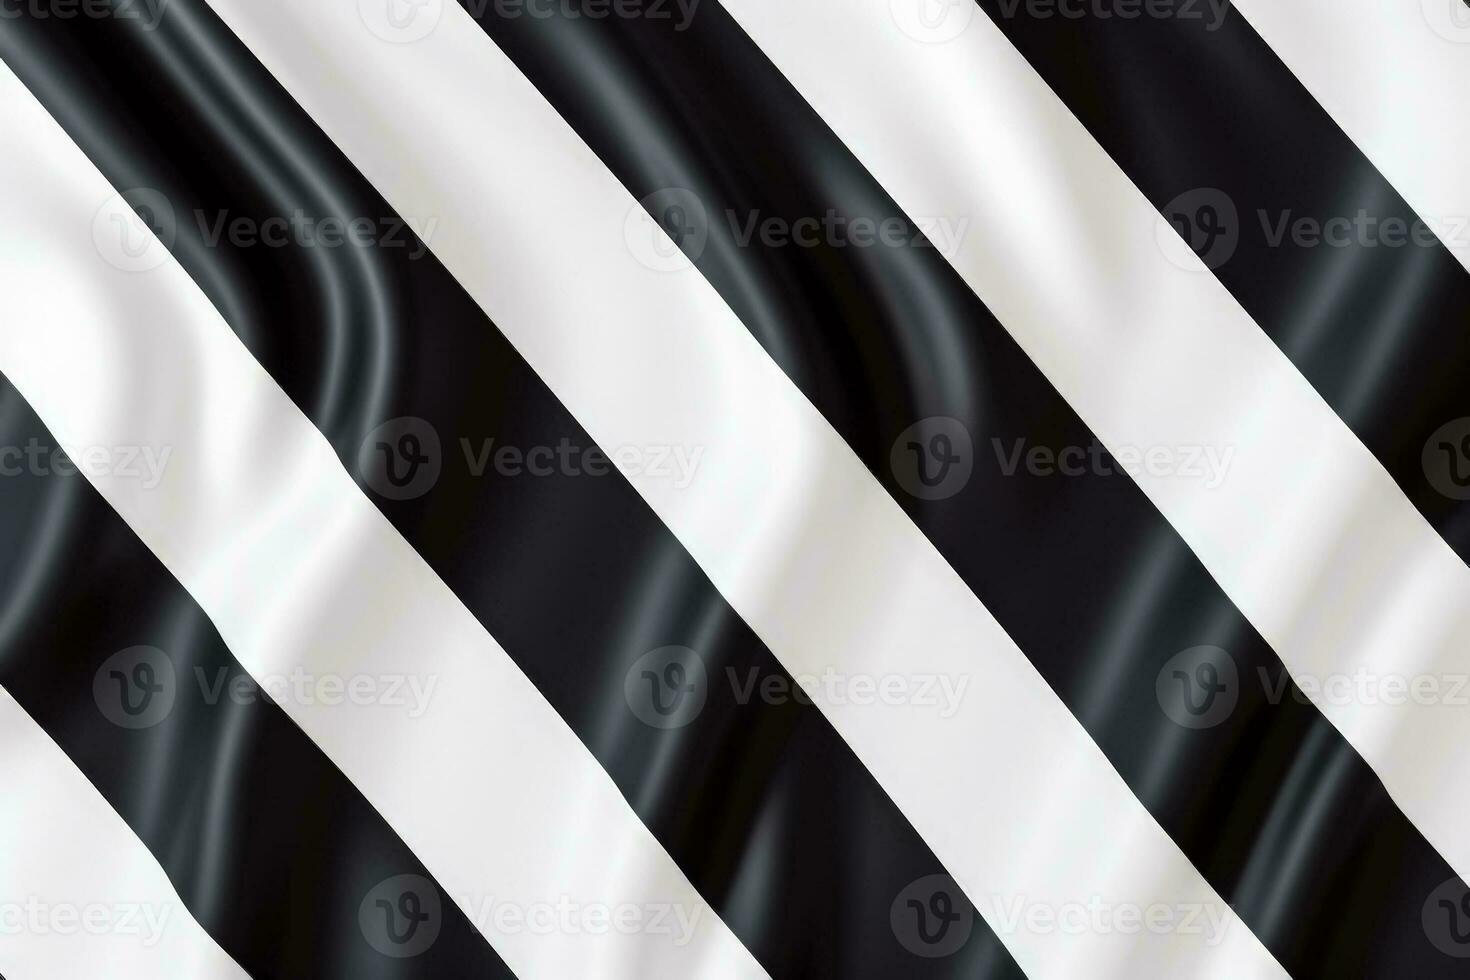 Black and white checkered pattern resembling a chessboard grid or mesh texture race flag photo